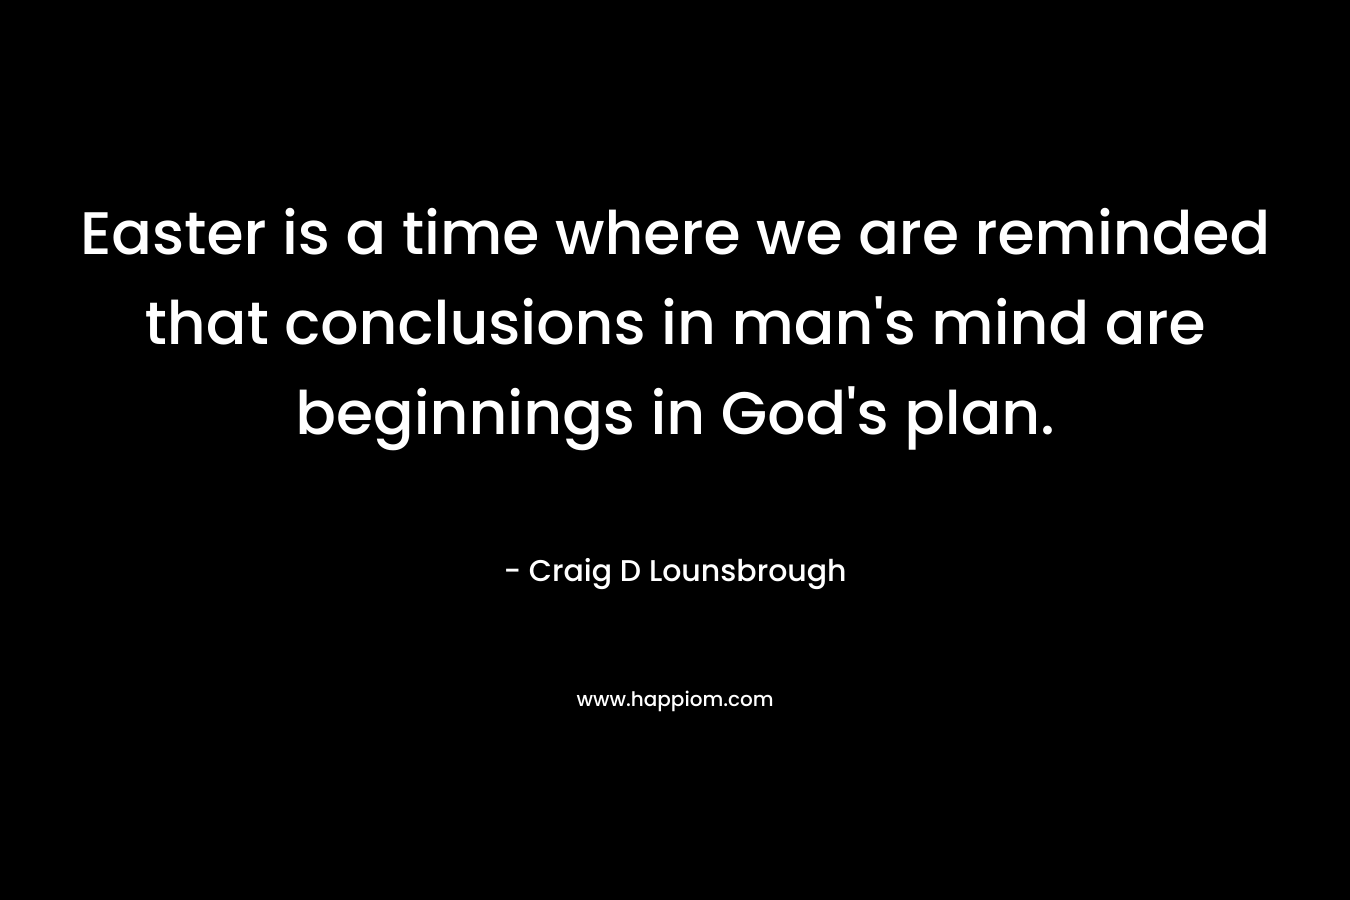 Easter is a time where we are reminded that conclusions in man’s mind are beginnings in God’s plan. – Craig D Lounsbrough